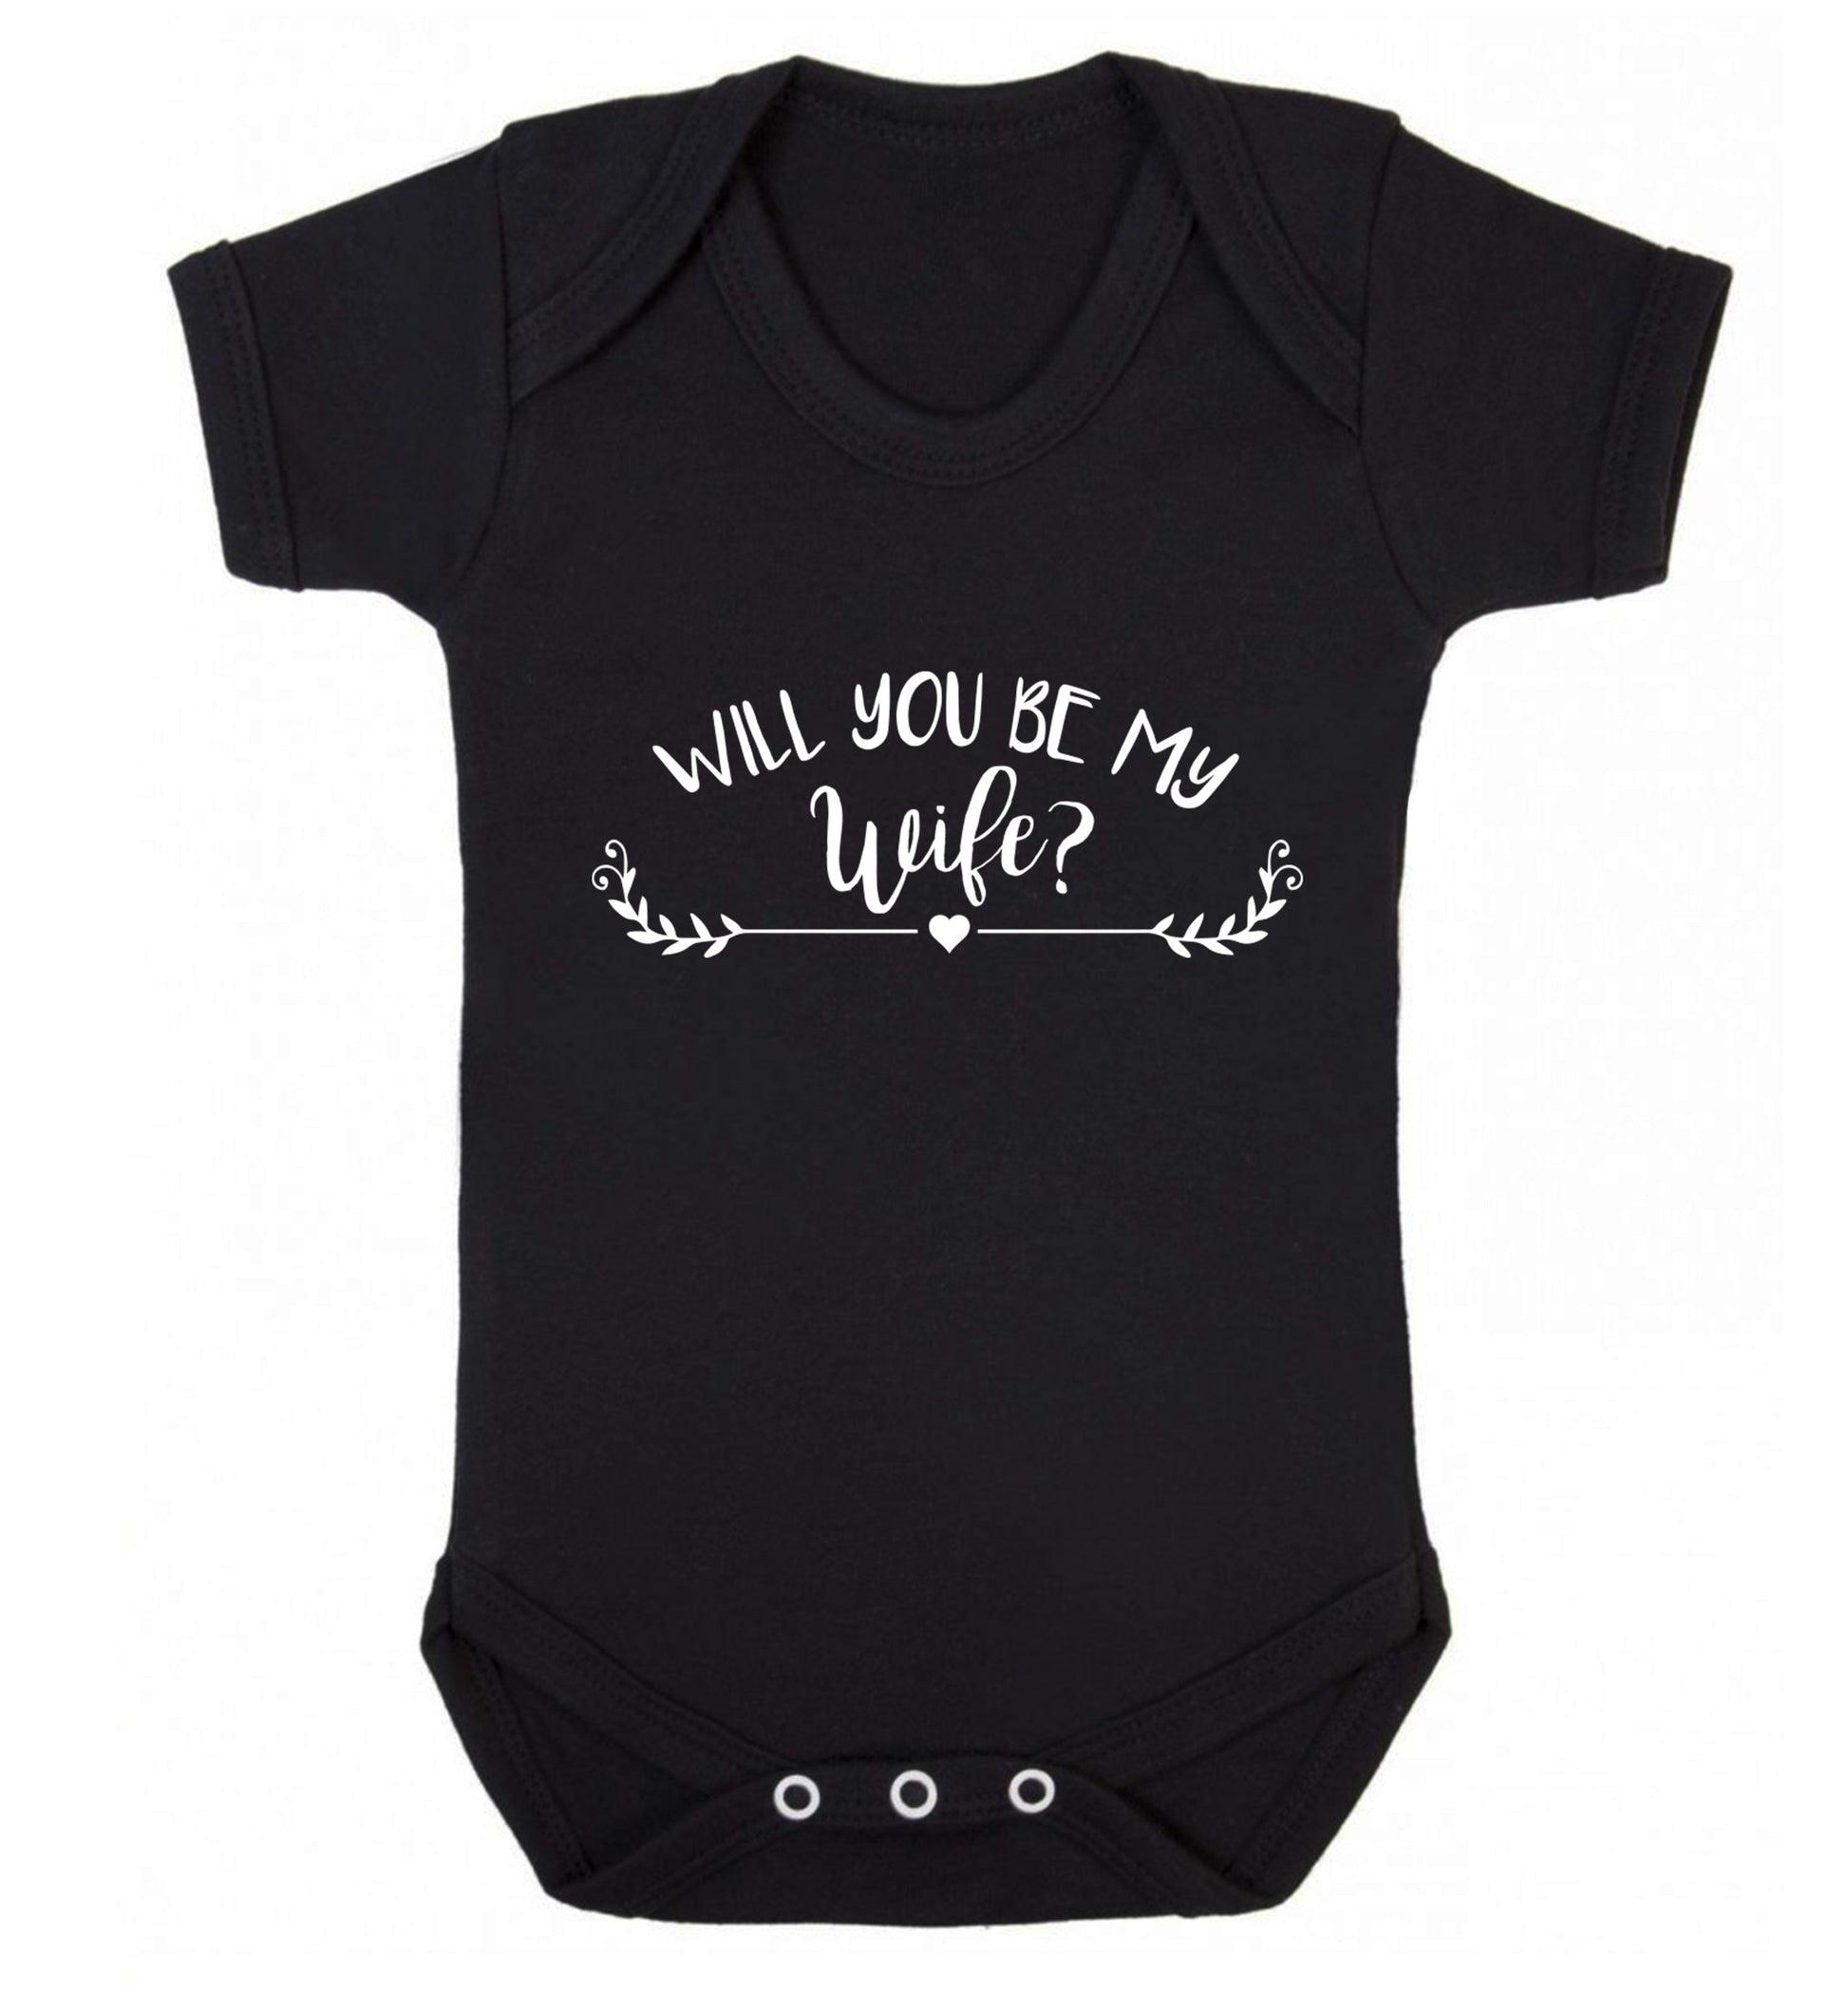 Will you be my wife? Baby Vest black 18-24 months